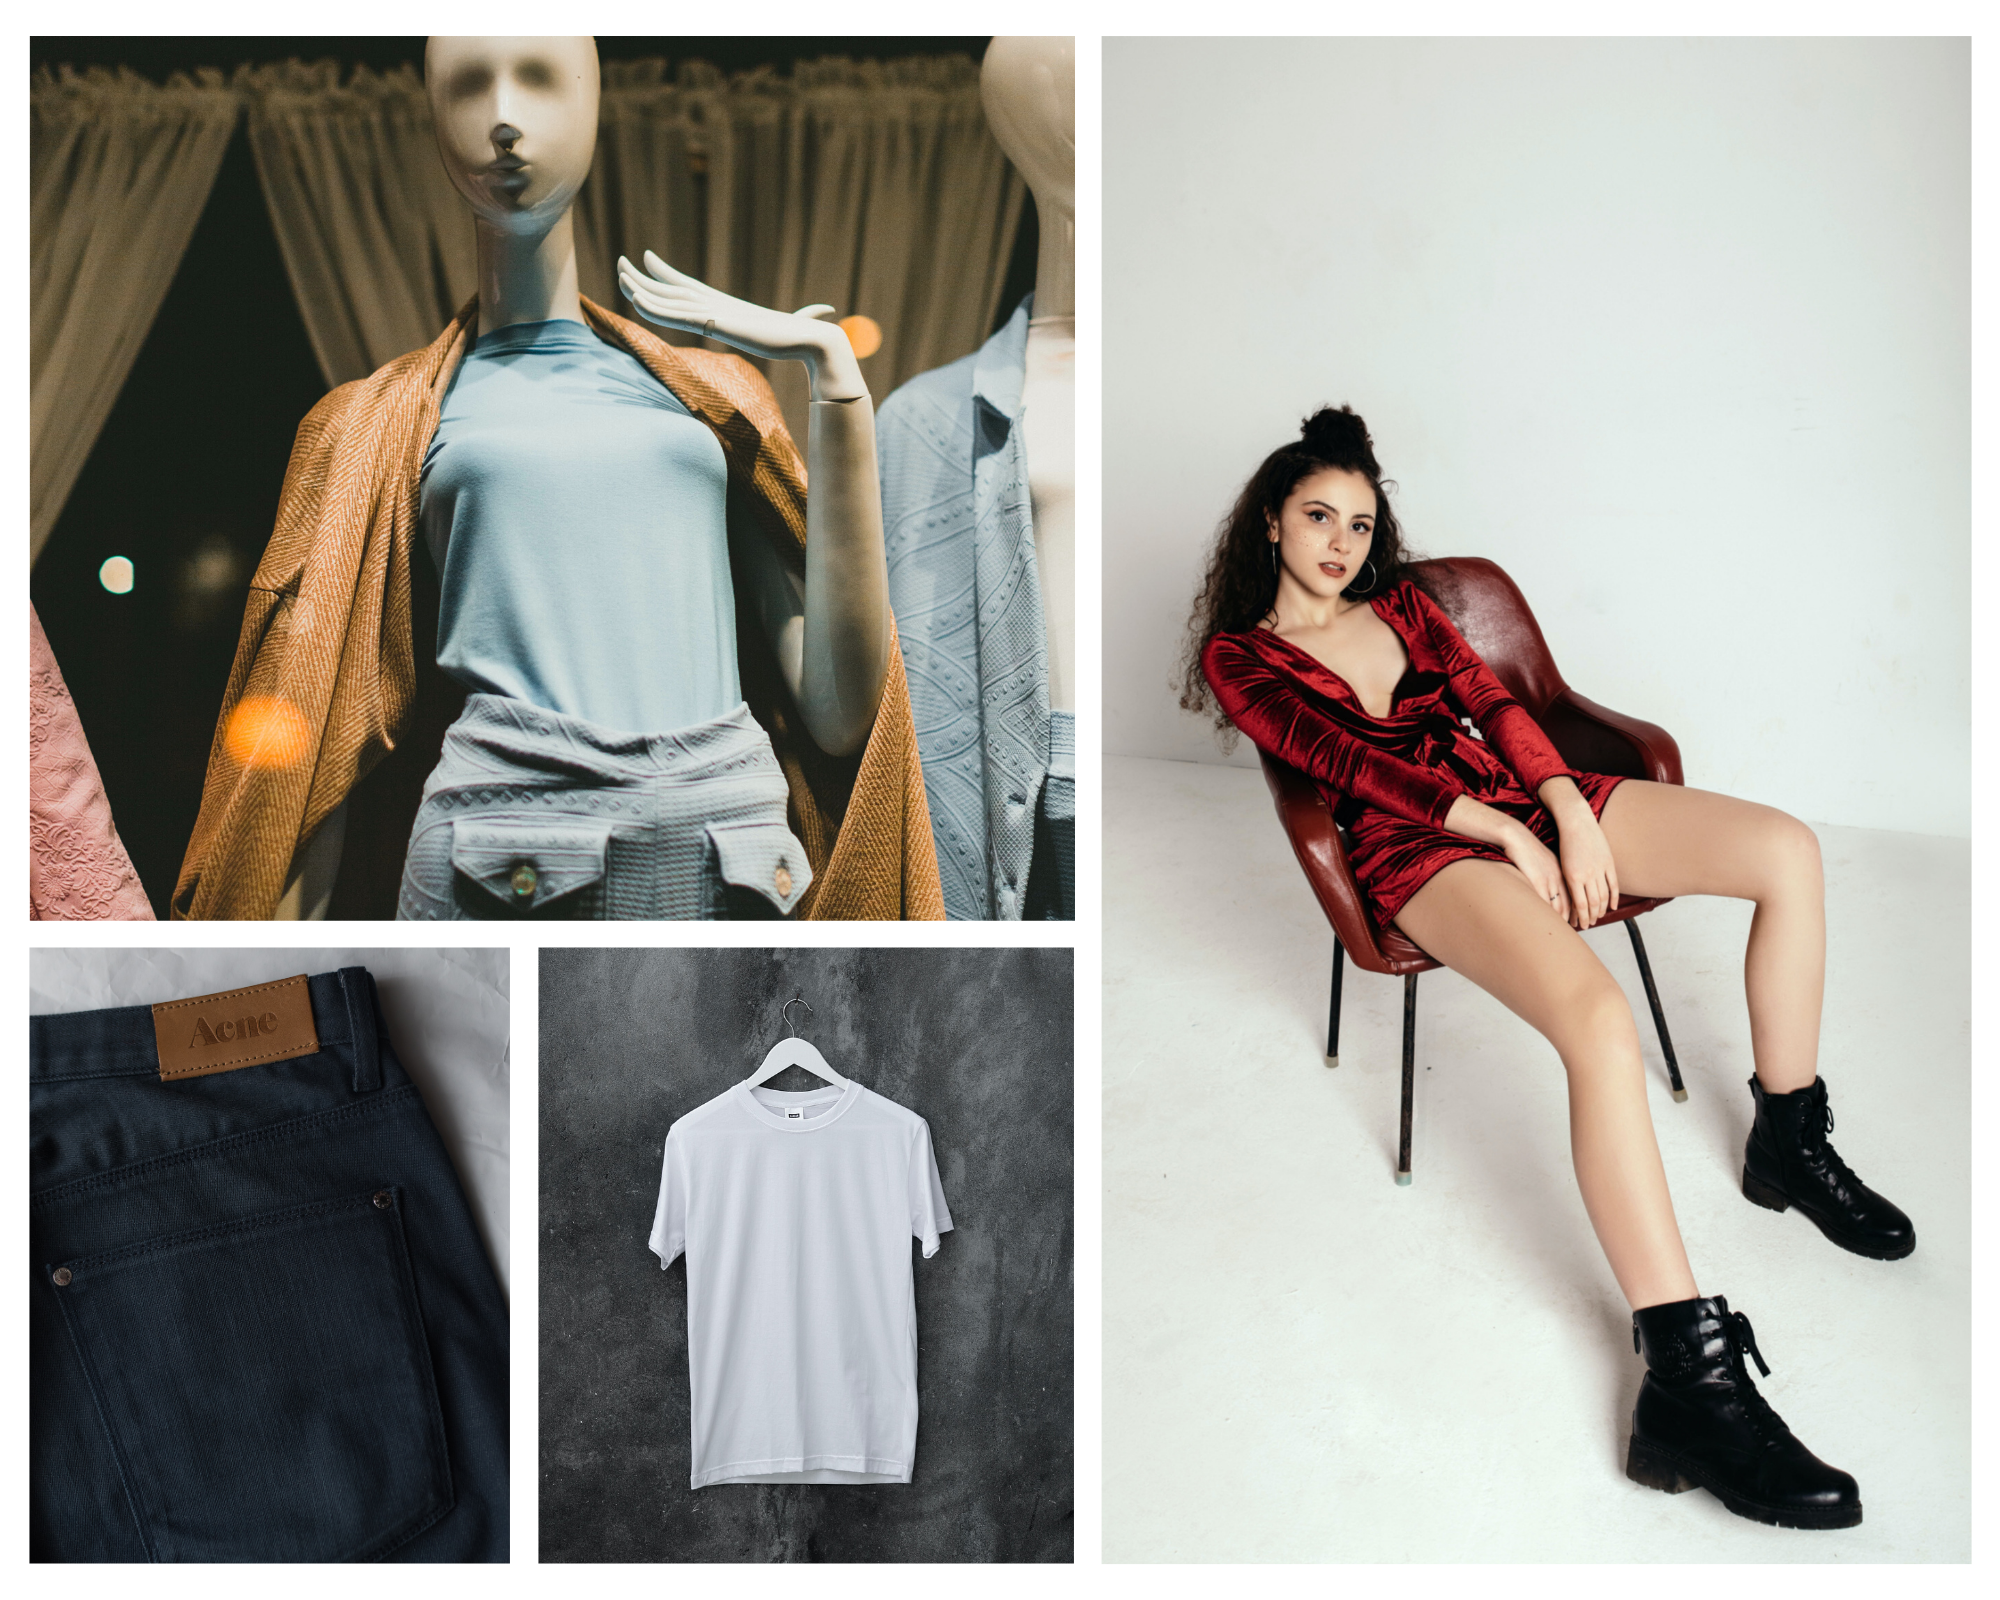 Using model, mannequin, hanger or flat lay to take pictures of clothes to sell